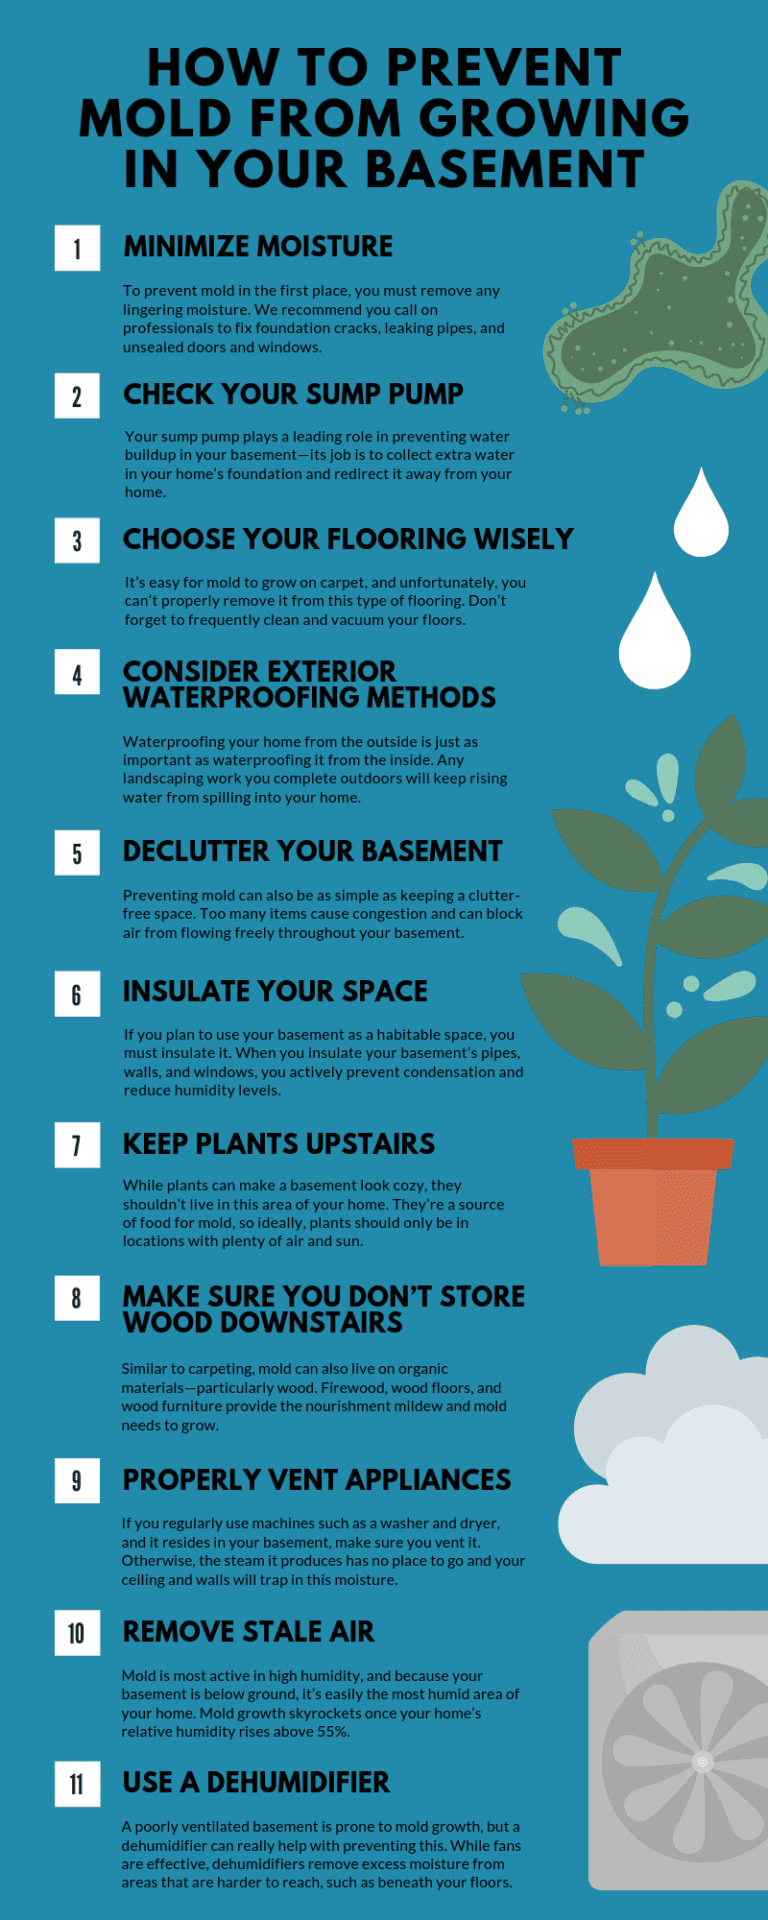 How to Prevent Mold from Growing in Your Basement